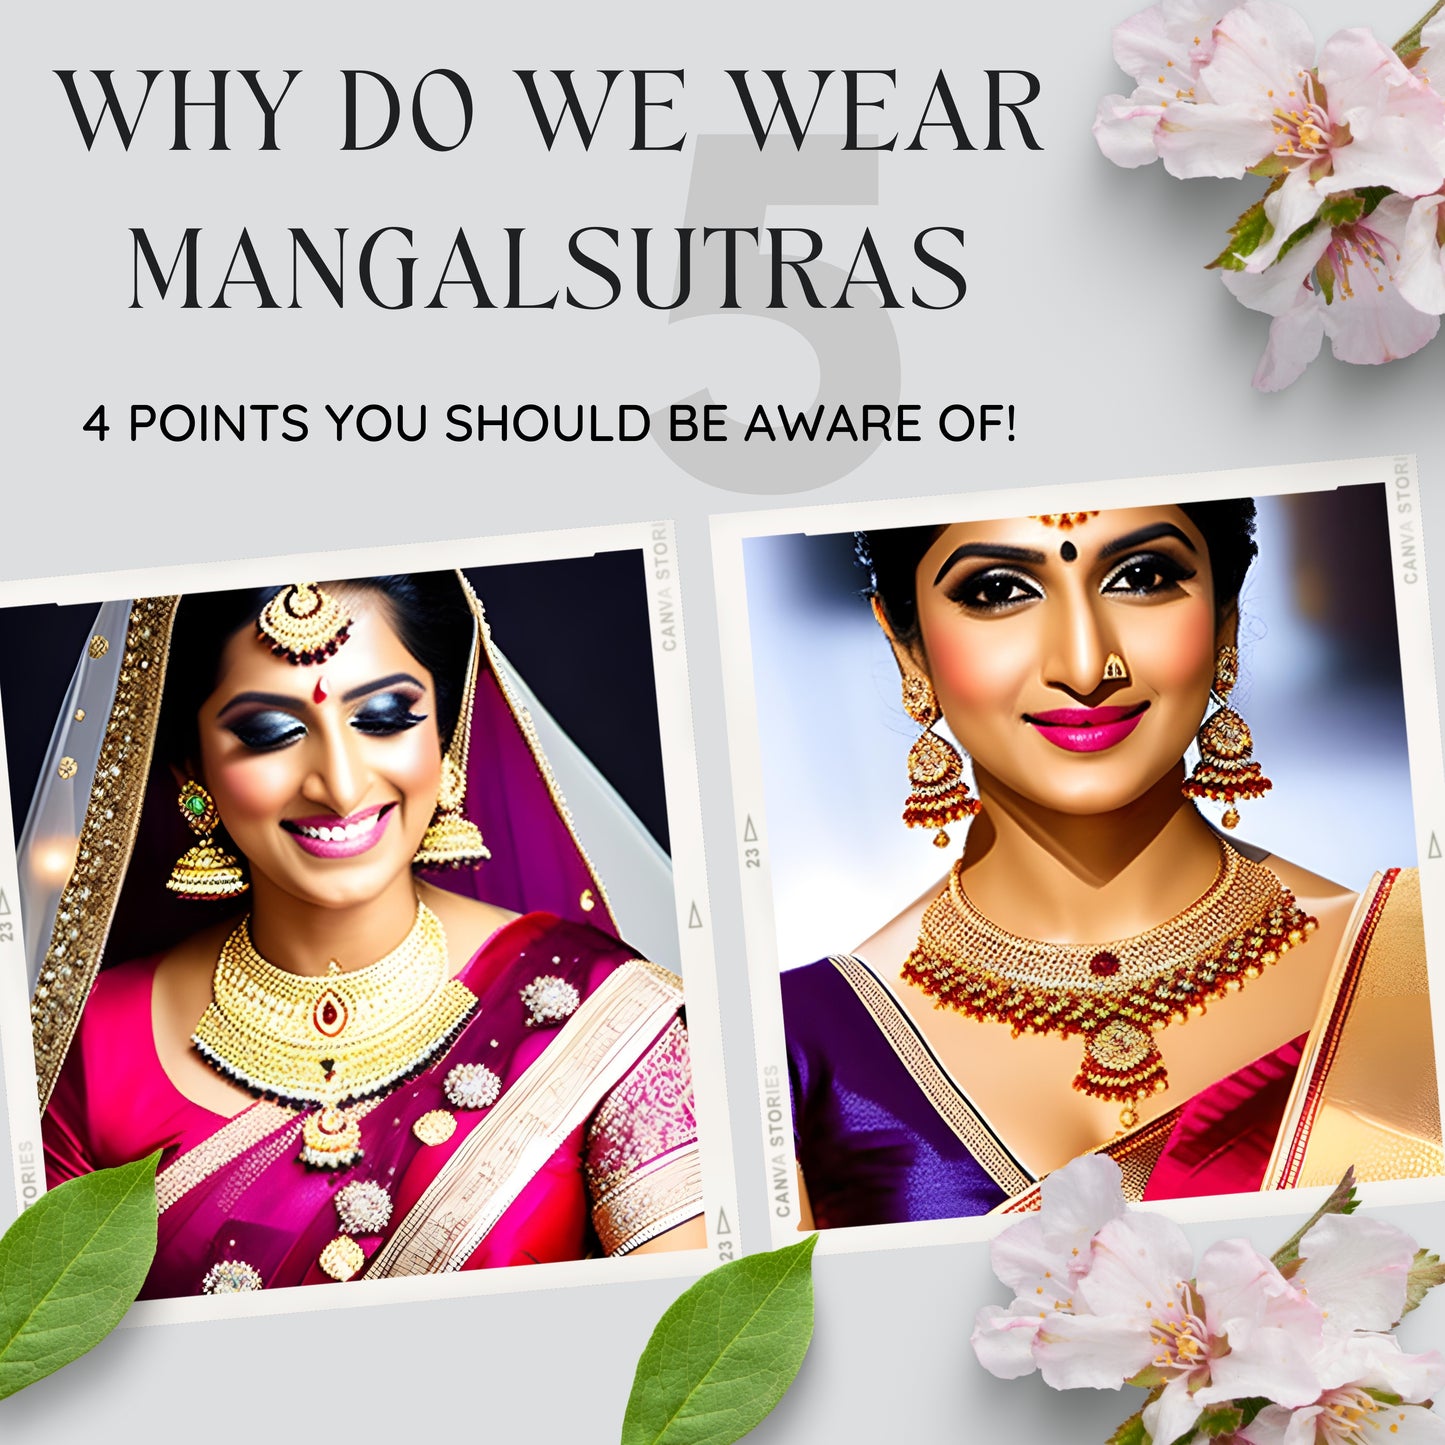 WHY DO WE WEAR MANGALSUTRAS 2.0